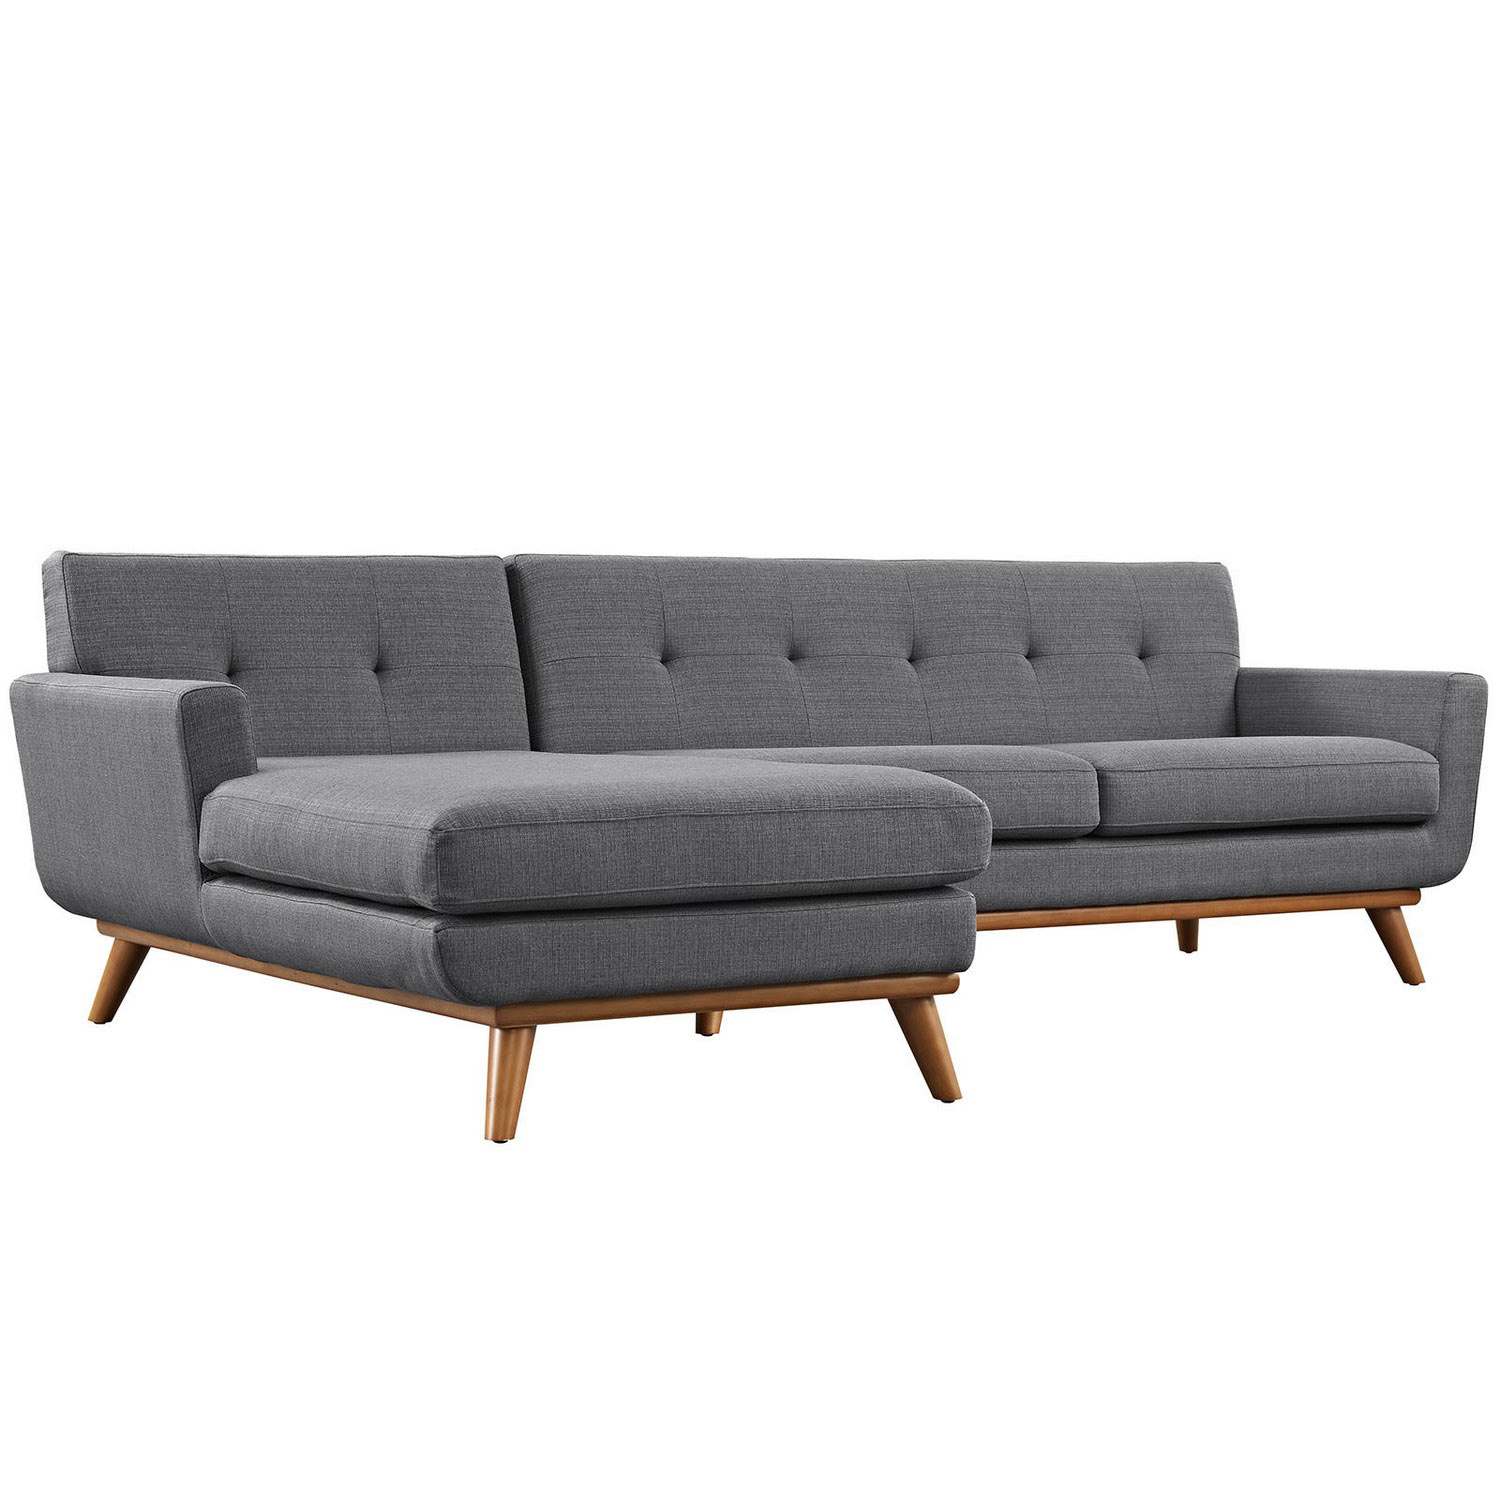 Modway Engage Left-Facing Sectional Sofa - Gray